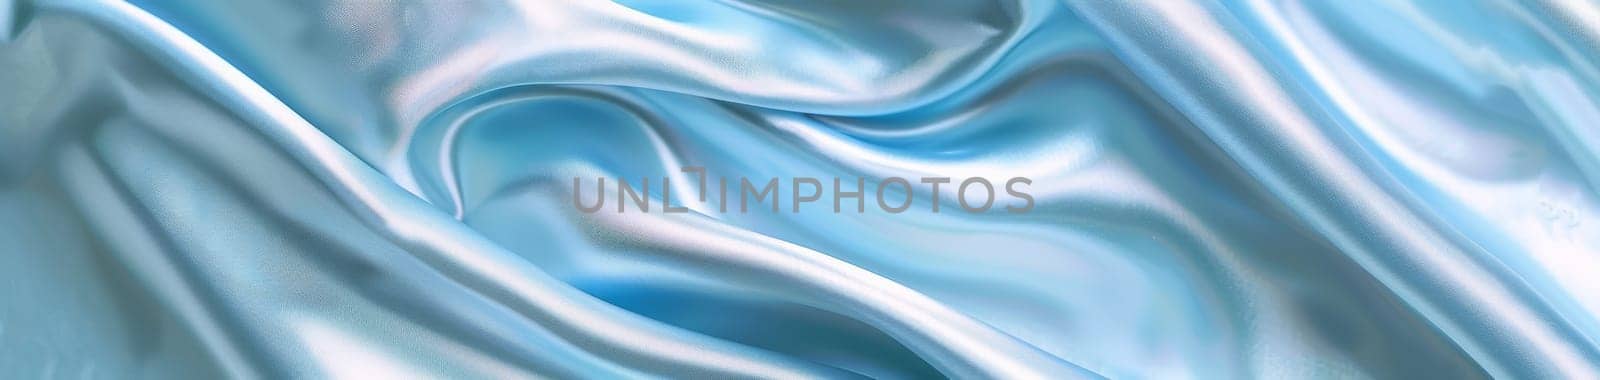 Luxe powder blue satin drapes luxuriously, with its soft folds catching the light, embodying a sense of refined grace. by sfinks